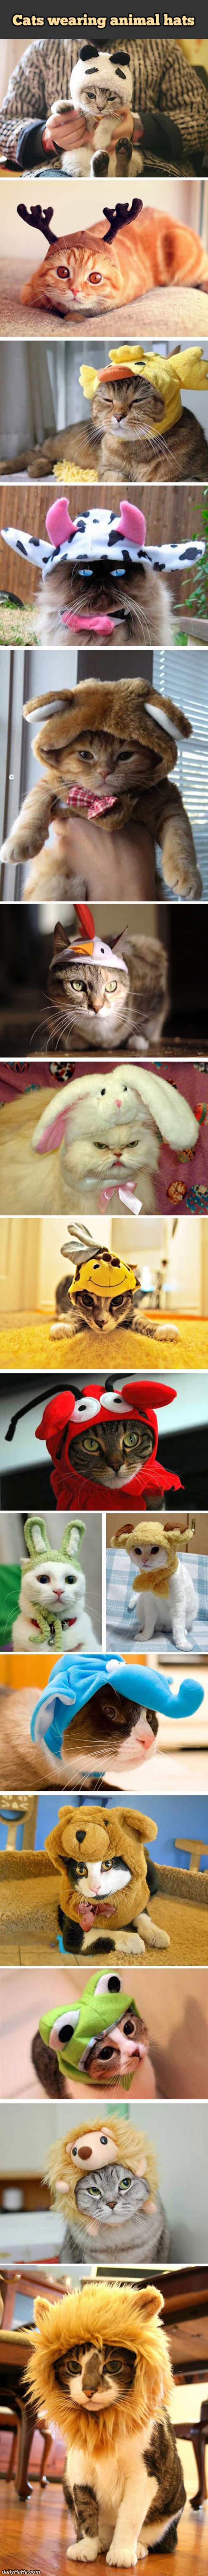 cats with hats funny picture